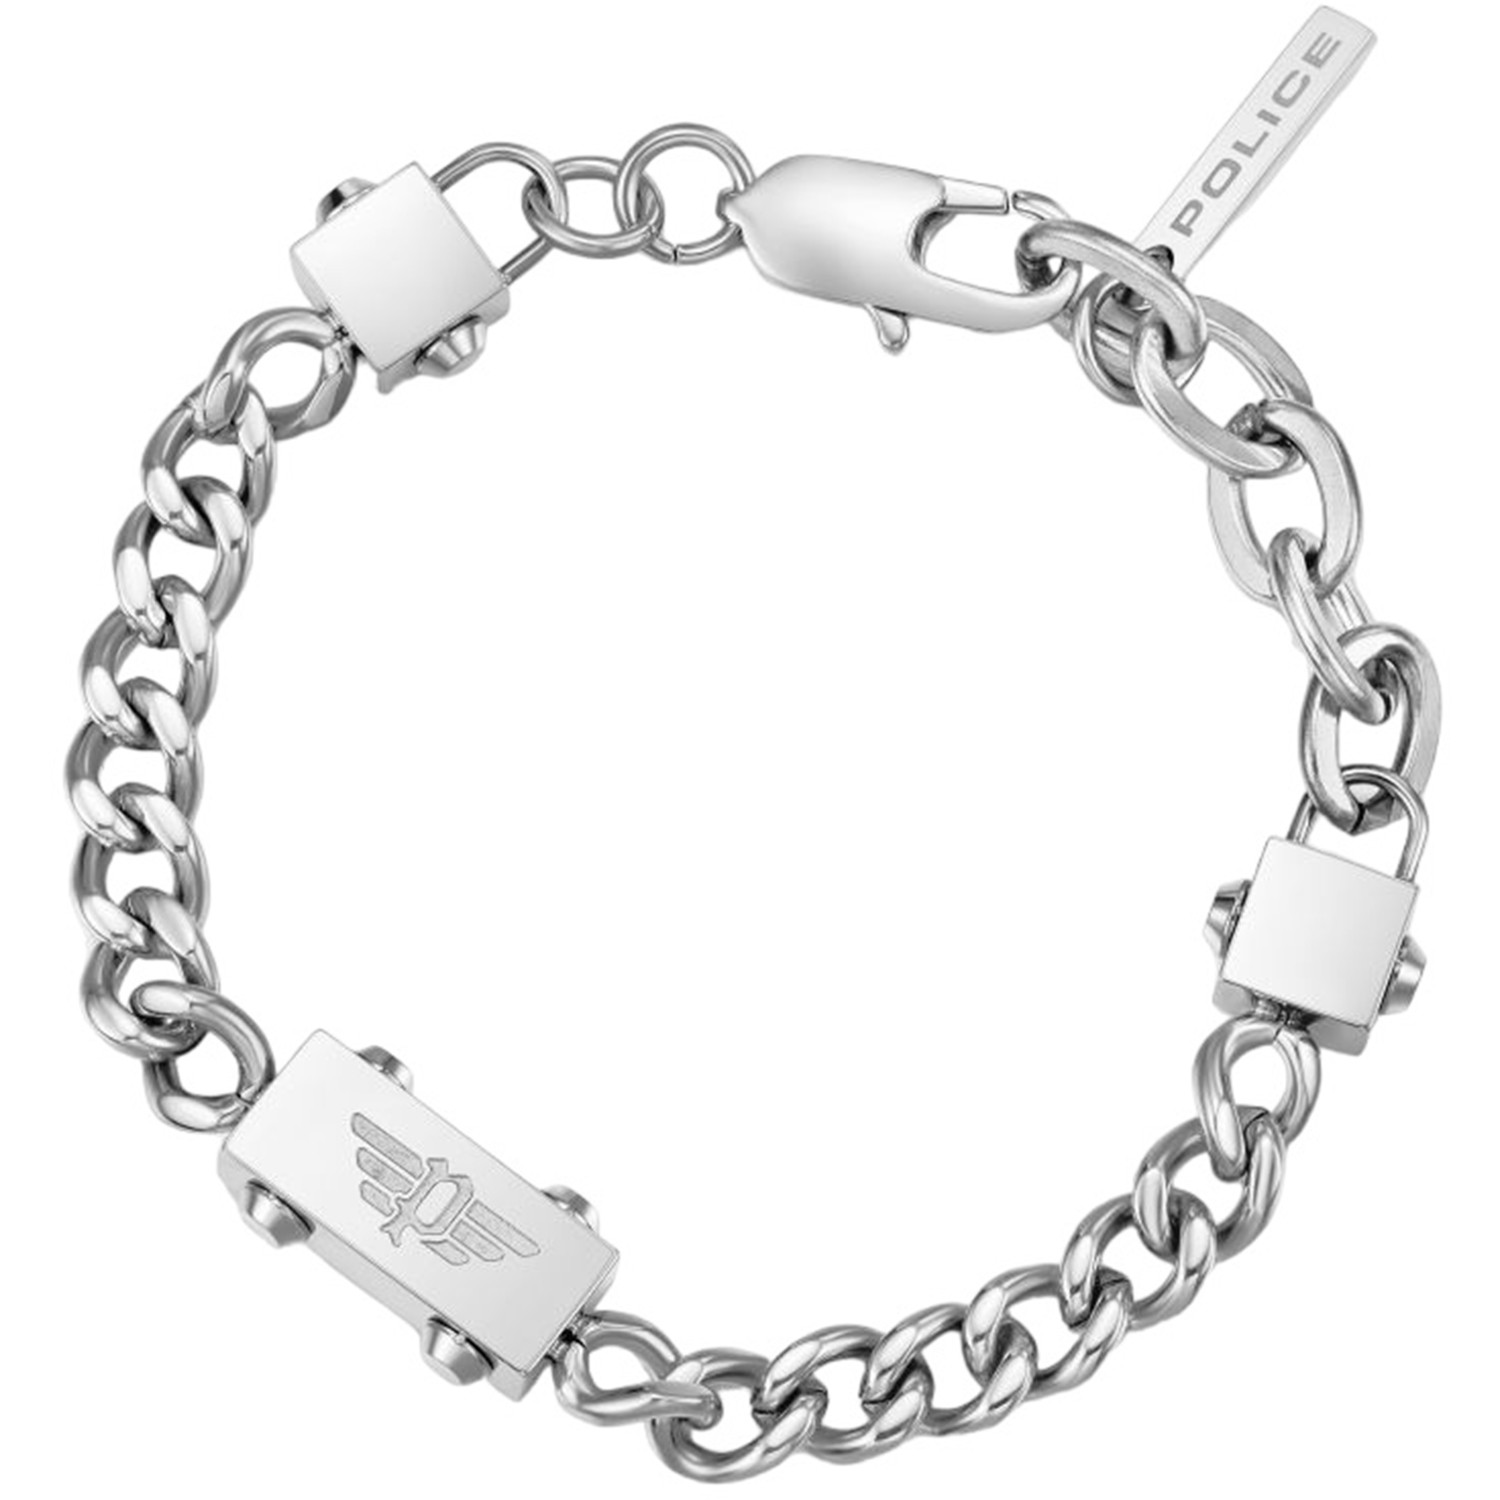 Police Men\'s Bracelets Police Men\'s Bracelets CHAINED PEAGB0002102  Stainless Steel Silver PEAGB0002102 | Comprar Bracelets Police Men\'s  Bracelets CHAINED PEAGB0002102 Stainless Steel Silver Barato |  Clicktime.eu» Comprar online